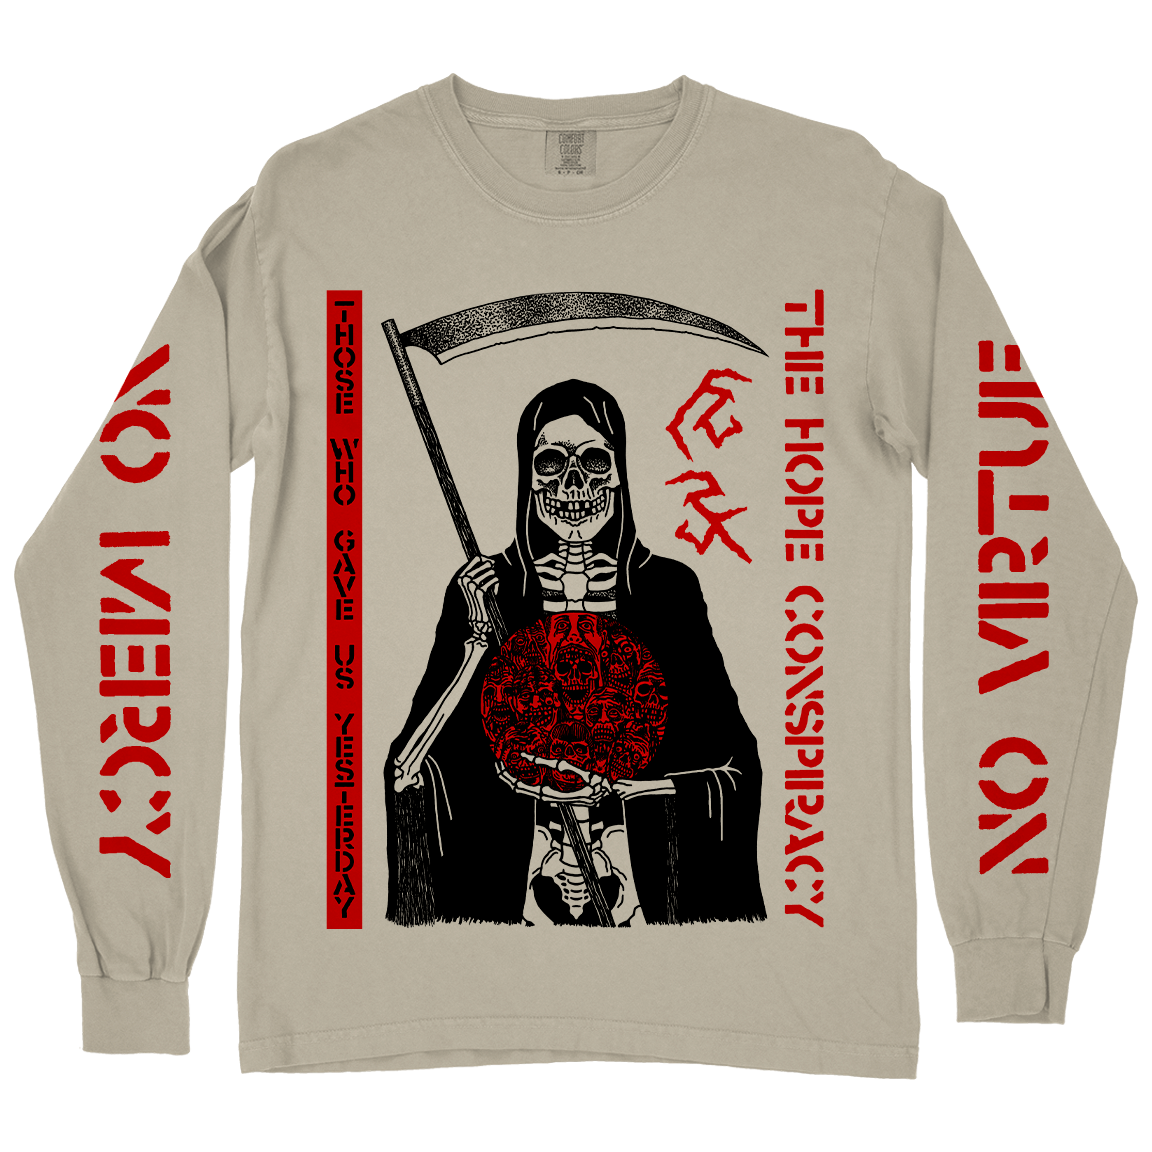 The Hope Conspiracy "Those Who Gave Us Yesterday" Sandstone Premium Longsleeve